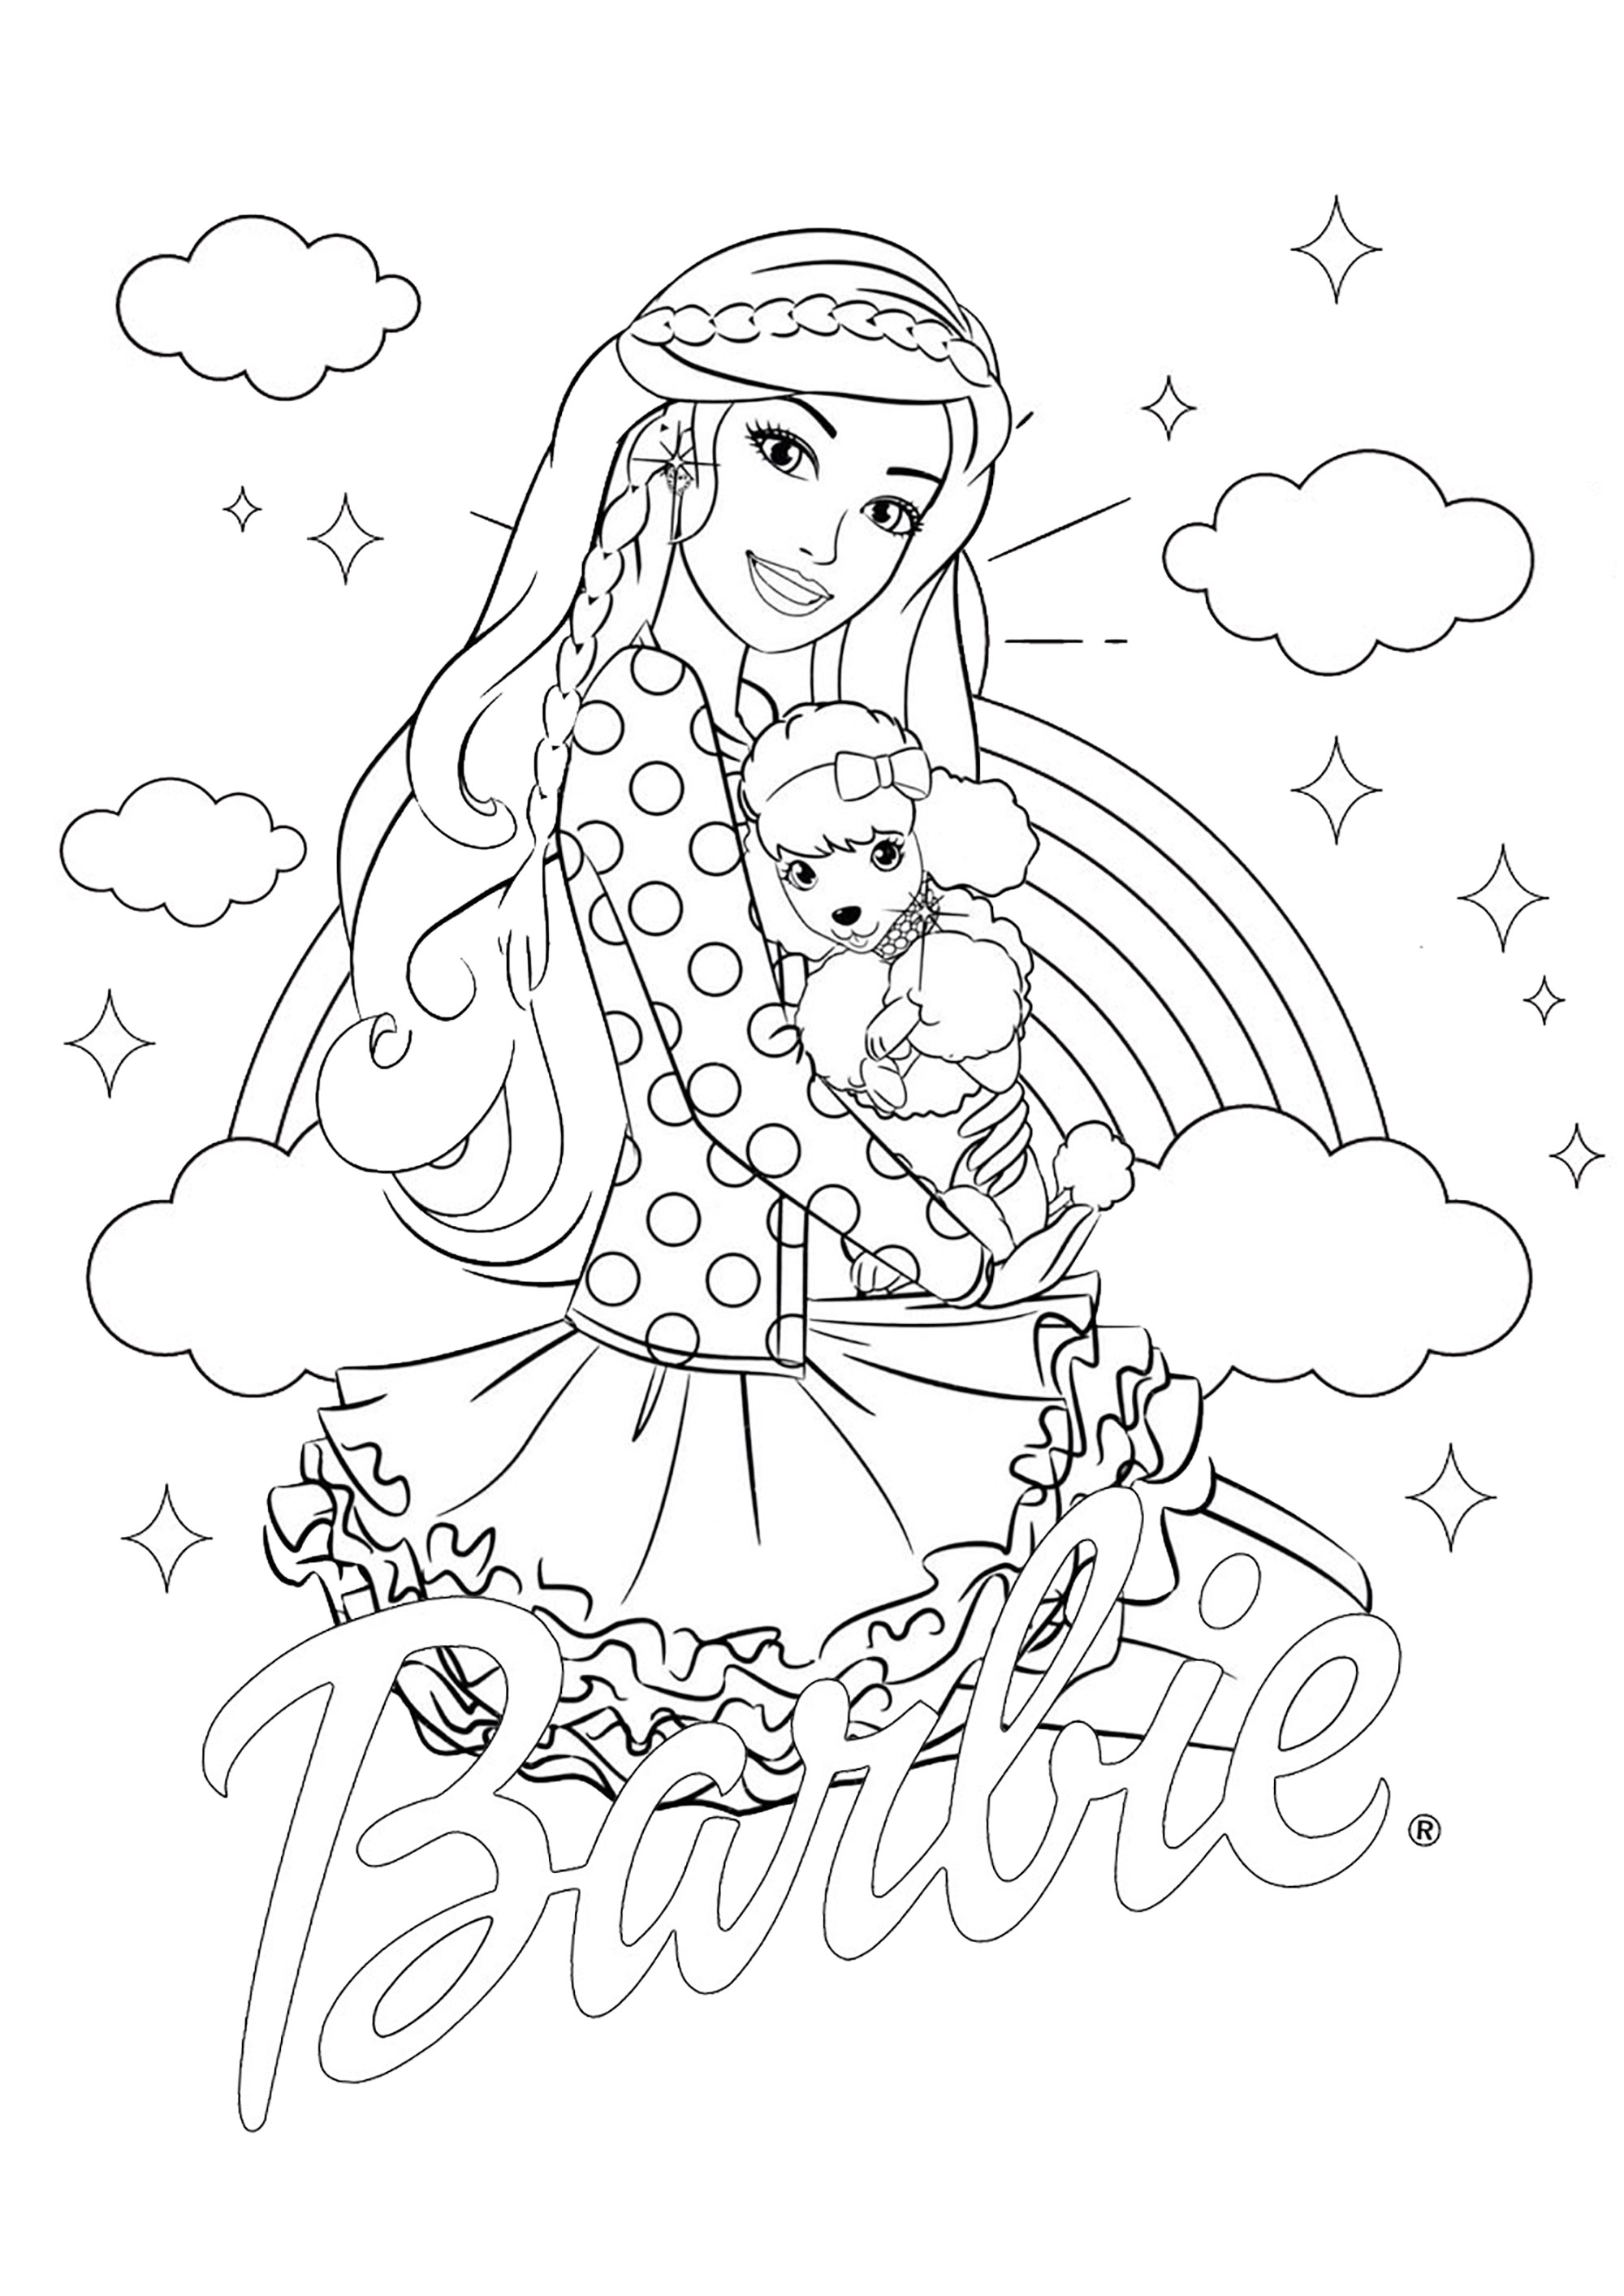 Barbie and her dog. Nice coloring of the beautiful Barbie and her little dog, with the Barbie logo and a background made up of a beautiful rainbow and pretty clouds, to add a little complexity.